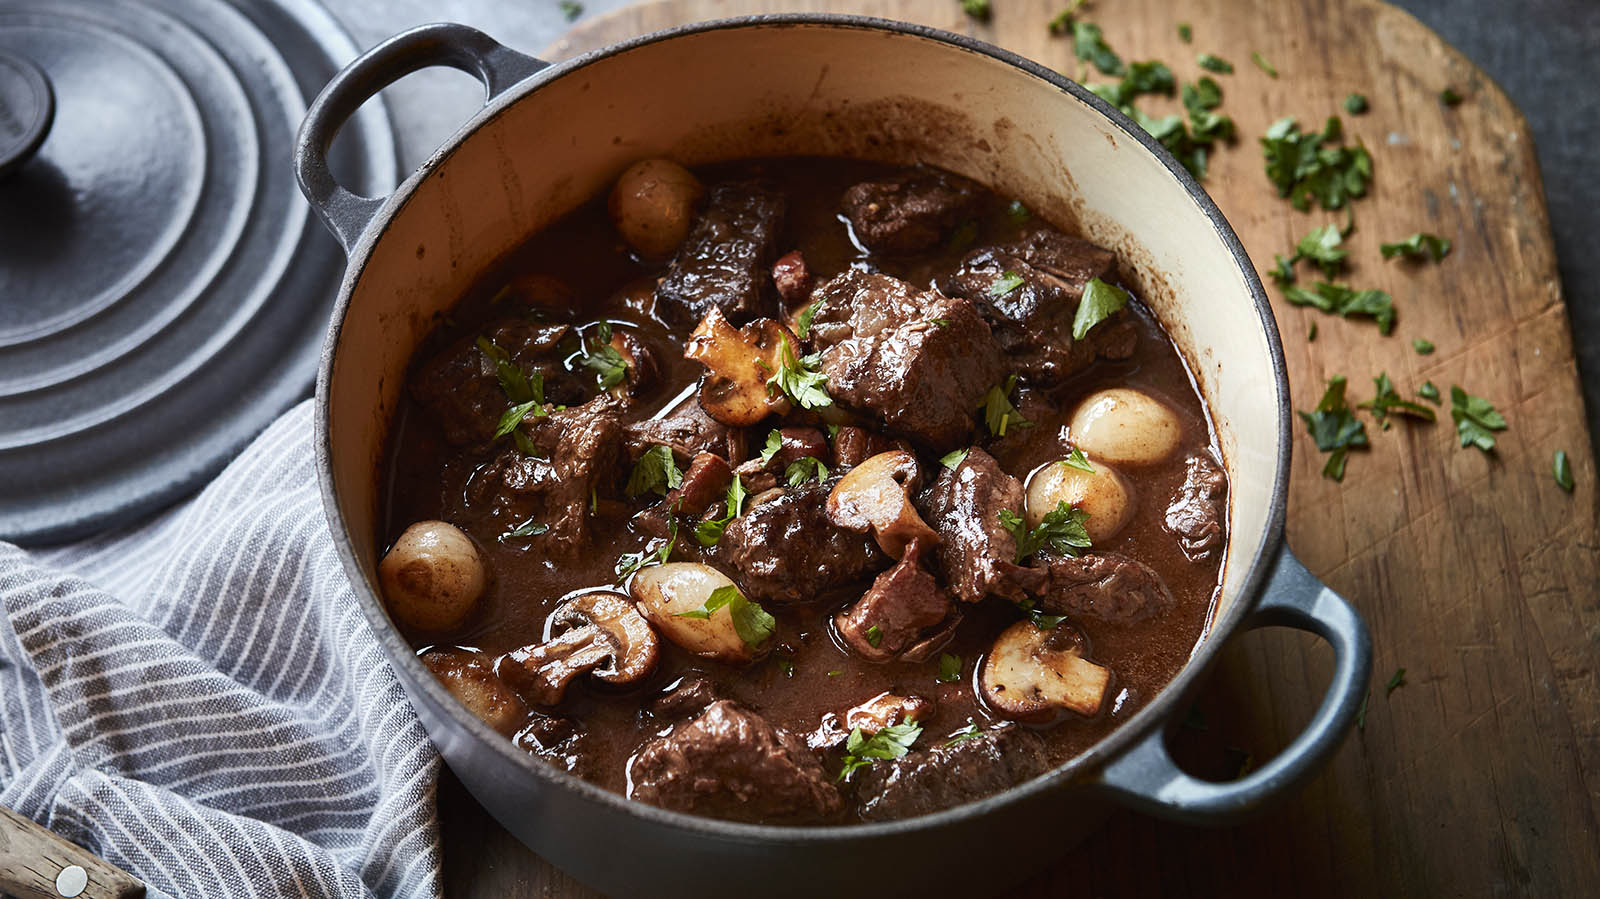 Can I Guess Your Age by How You Rate Old-School Dishes? Quiz Beef bourguignon